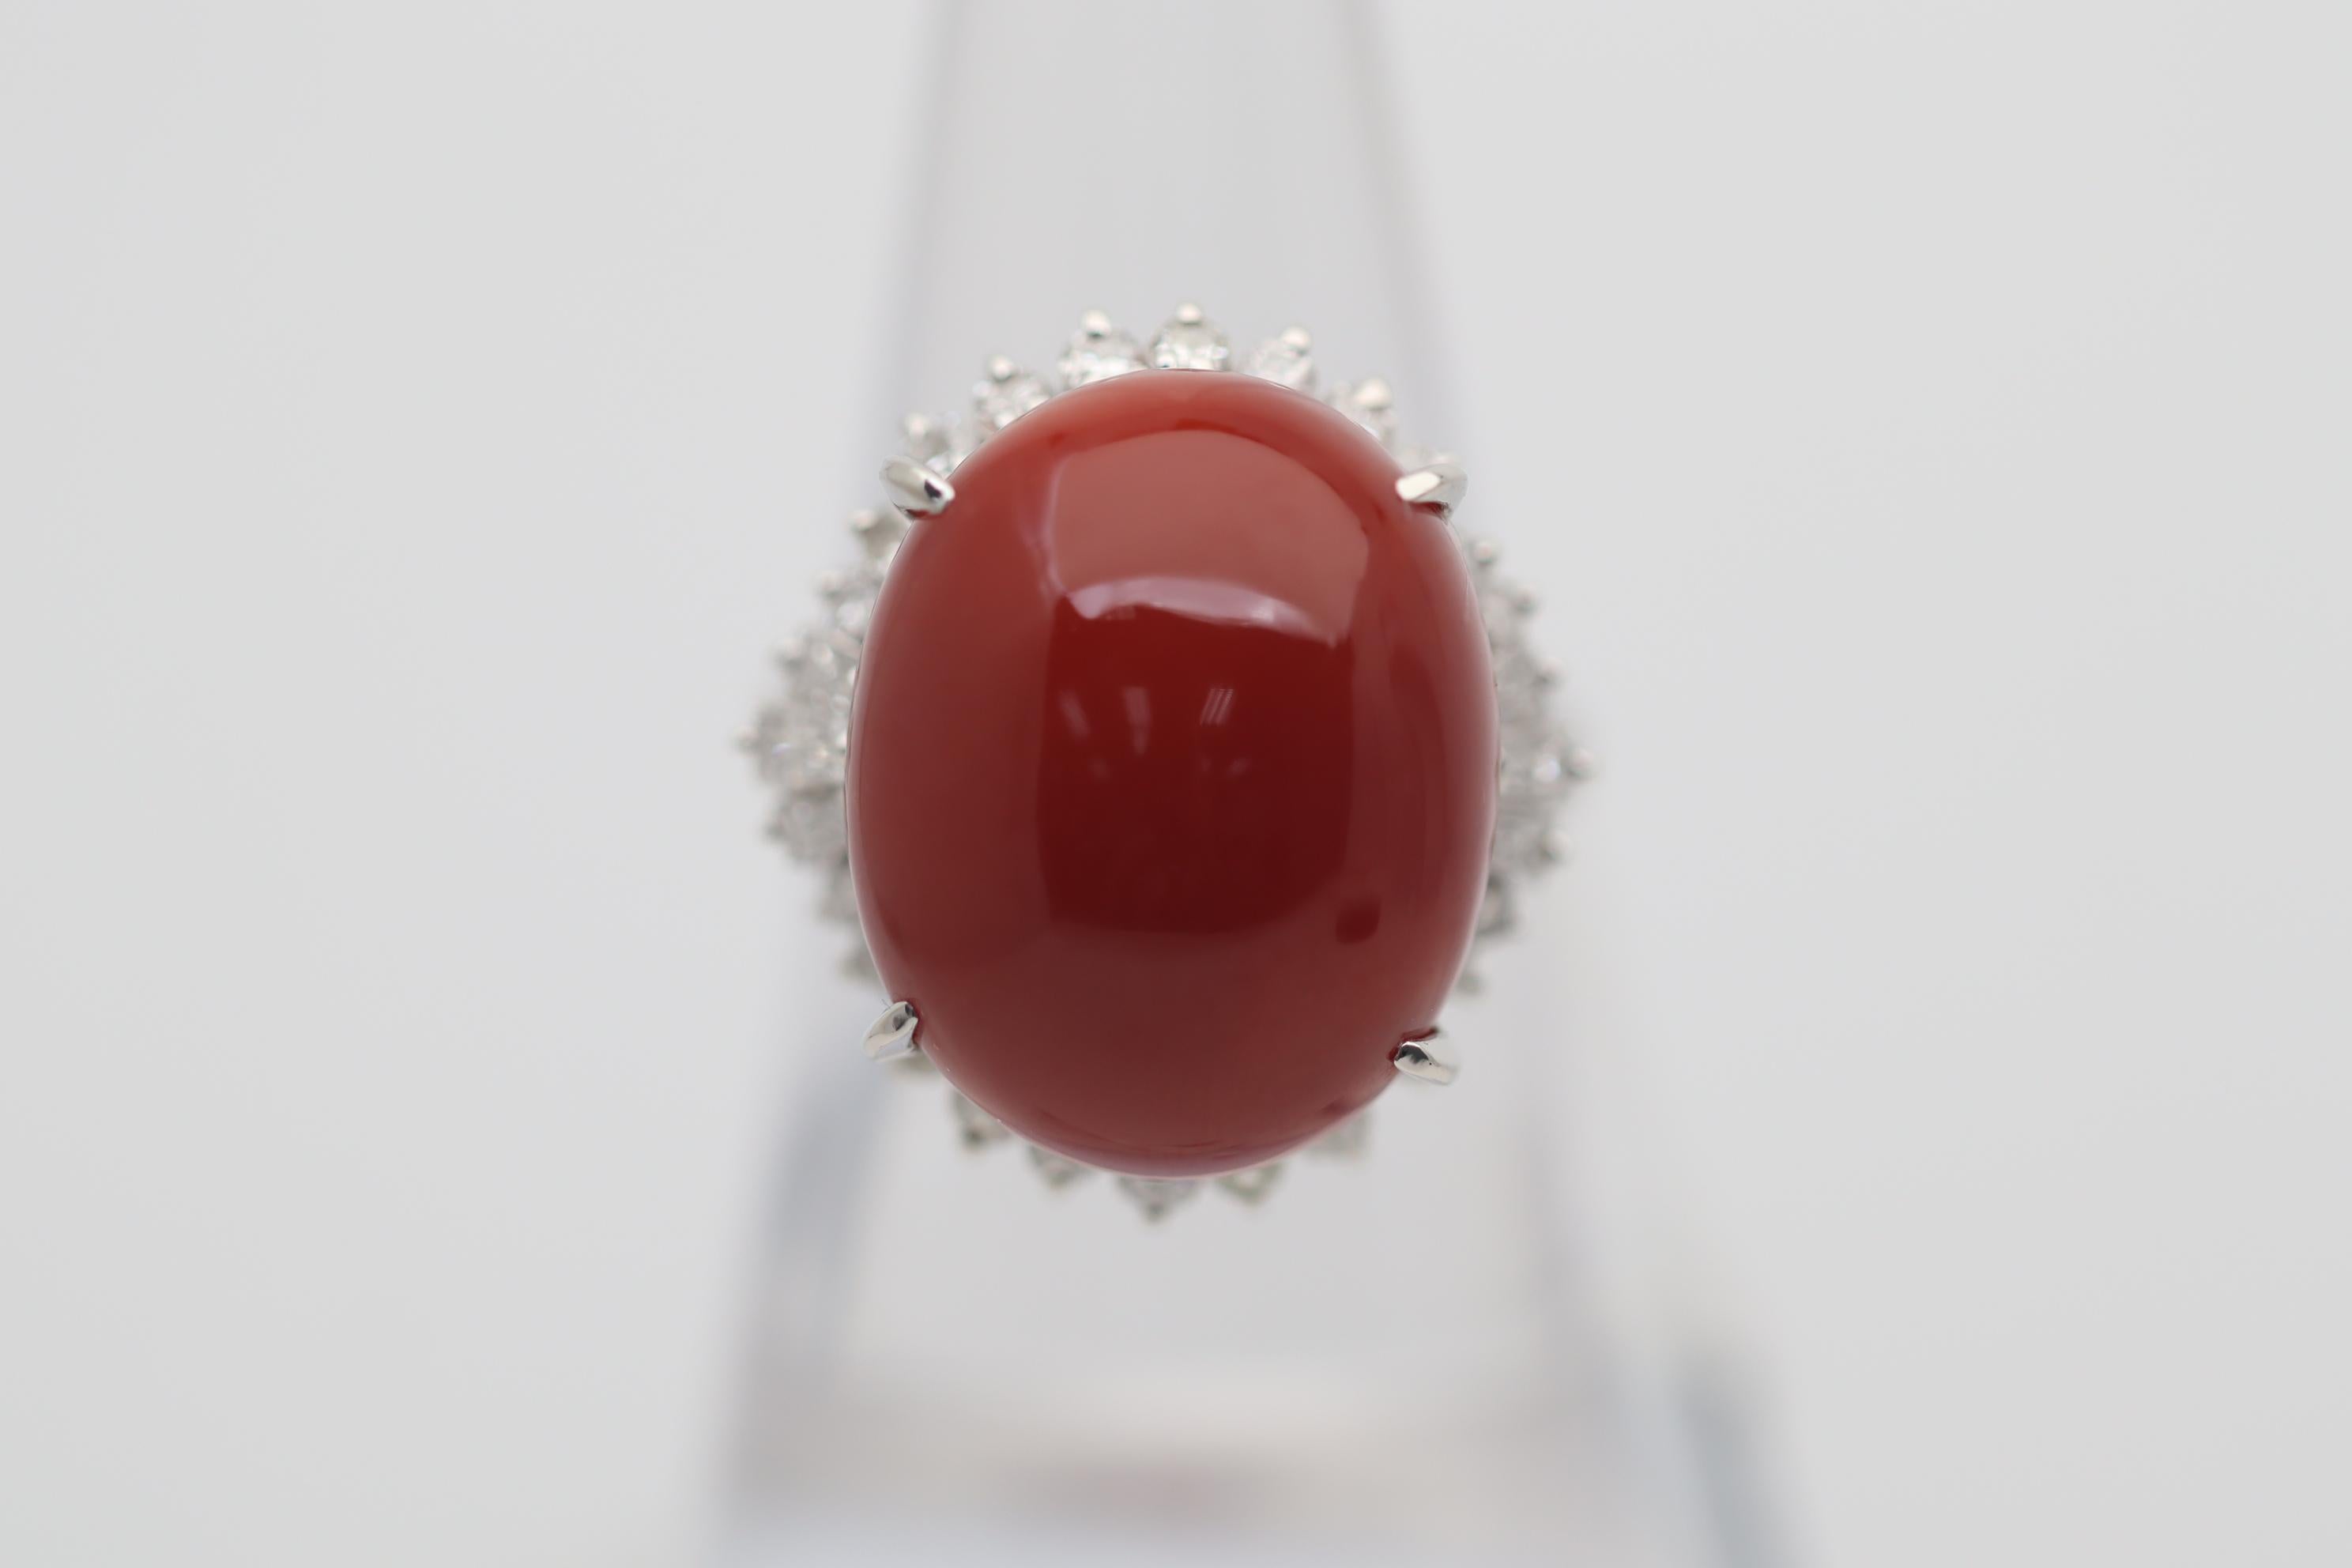 A large and impressive piece of natural red coral takes center stage! It measures 18.4mm x 14.9mm and has a bright polished rounded dome allowing the coral's natural deep rich red color showcase. It is complemented by 0.79 carats of round brilliant